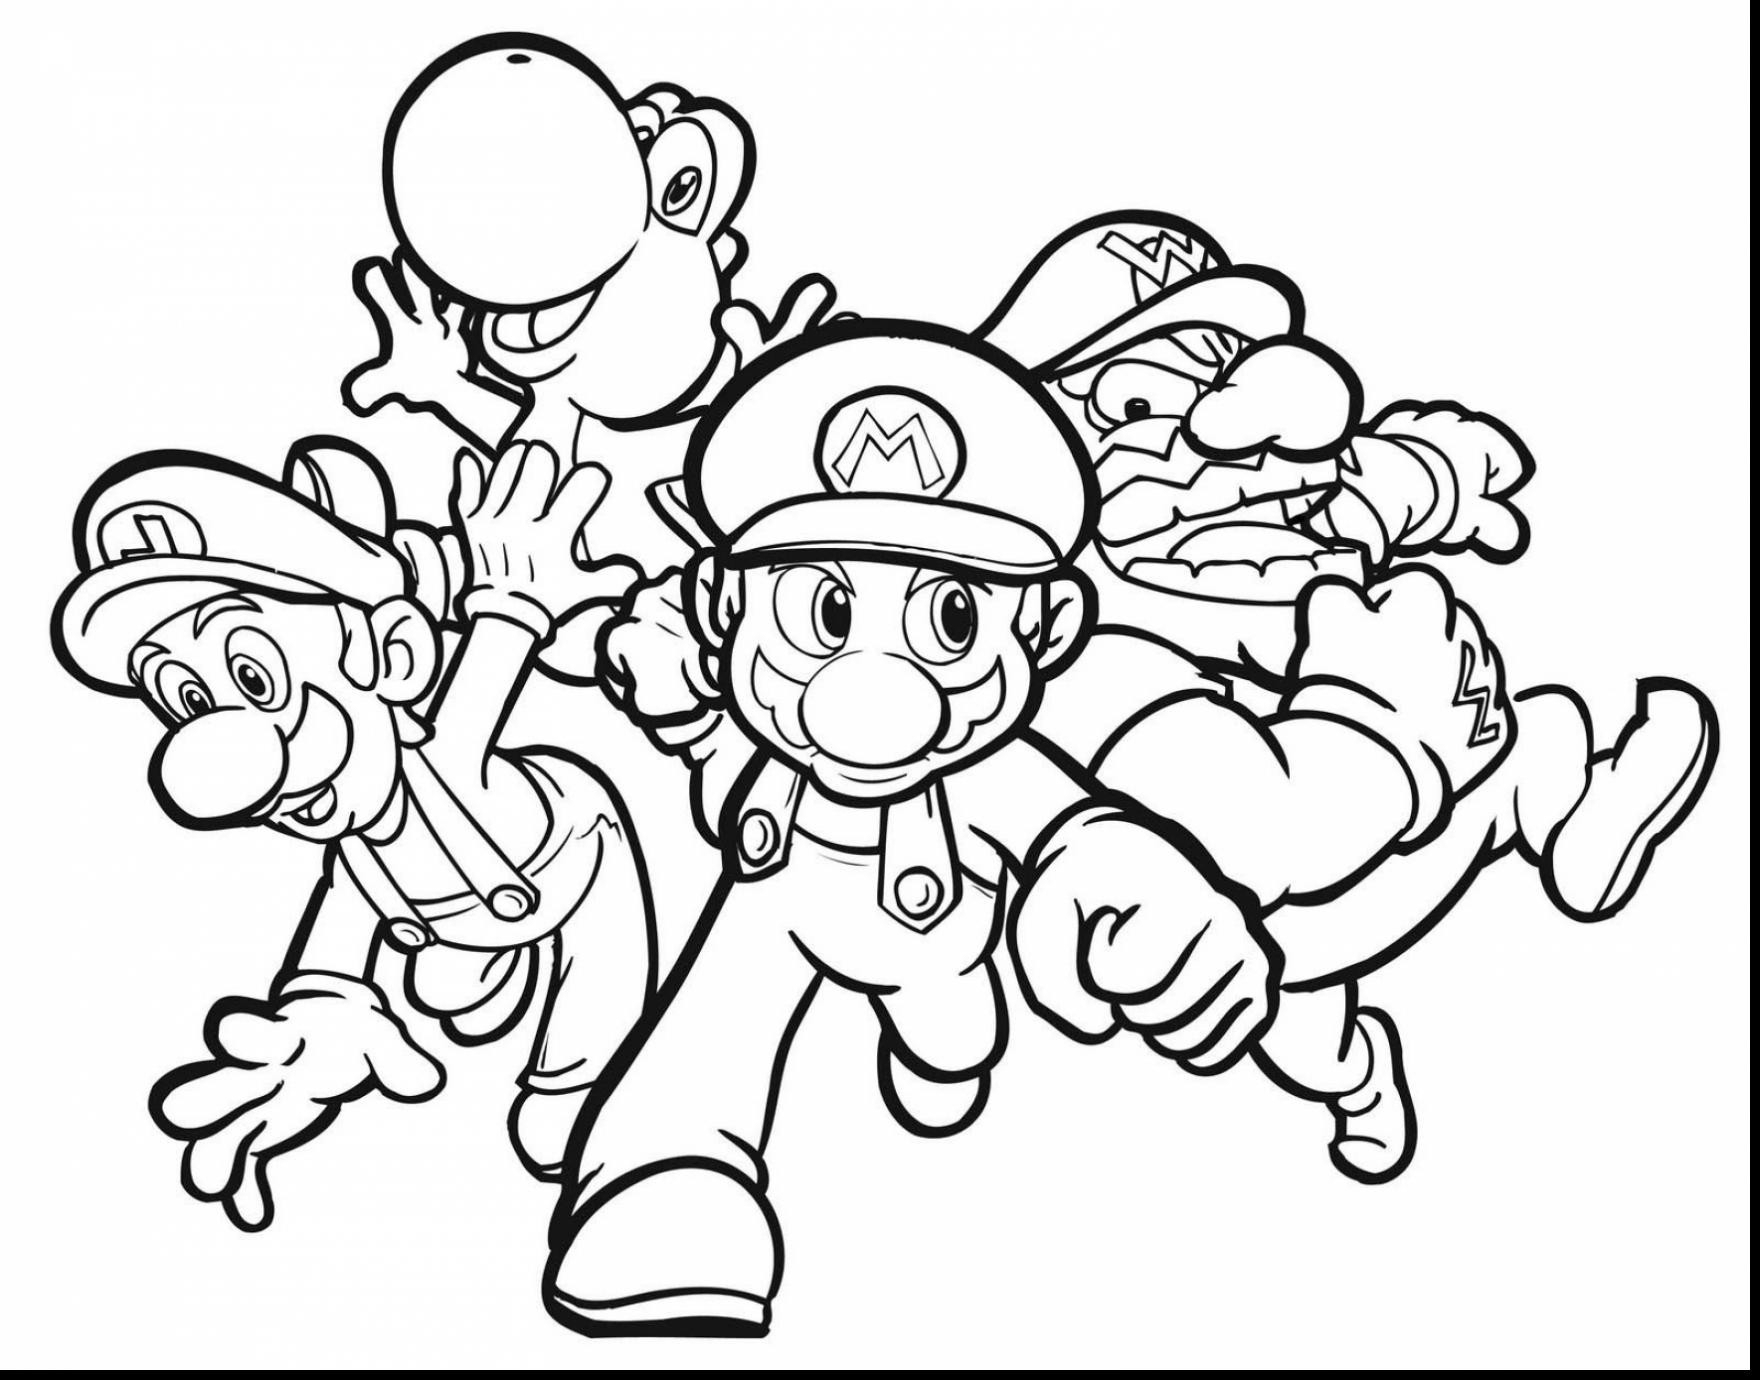 Plant Vs Zombie Coloring Pages Coloring Pages Splendi Plants Vs Zombies Coloring Pages Mario